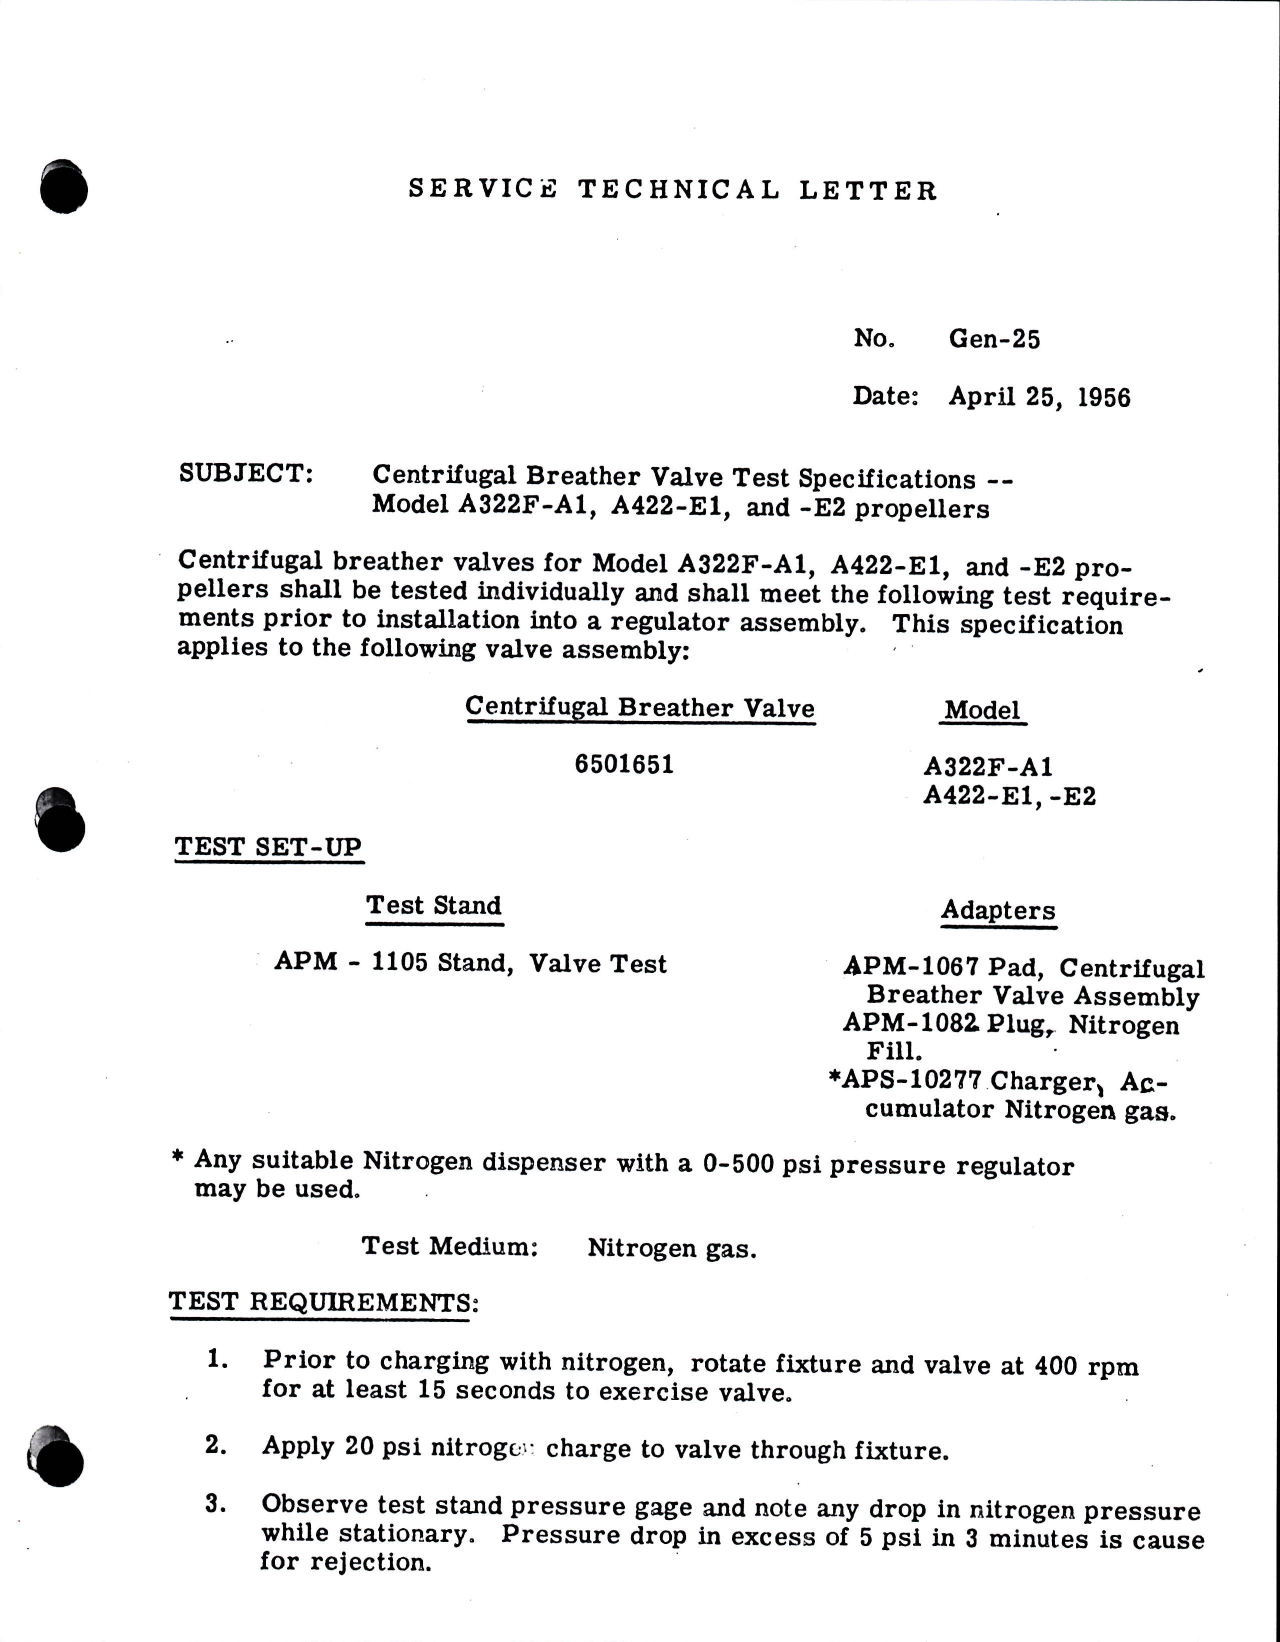 Sample page 1 from AirCorps Library document: Centrifugal Breather Valve Test Specifications for Model A322F-A1, A422-E1 and A422-E2 Propellers